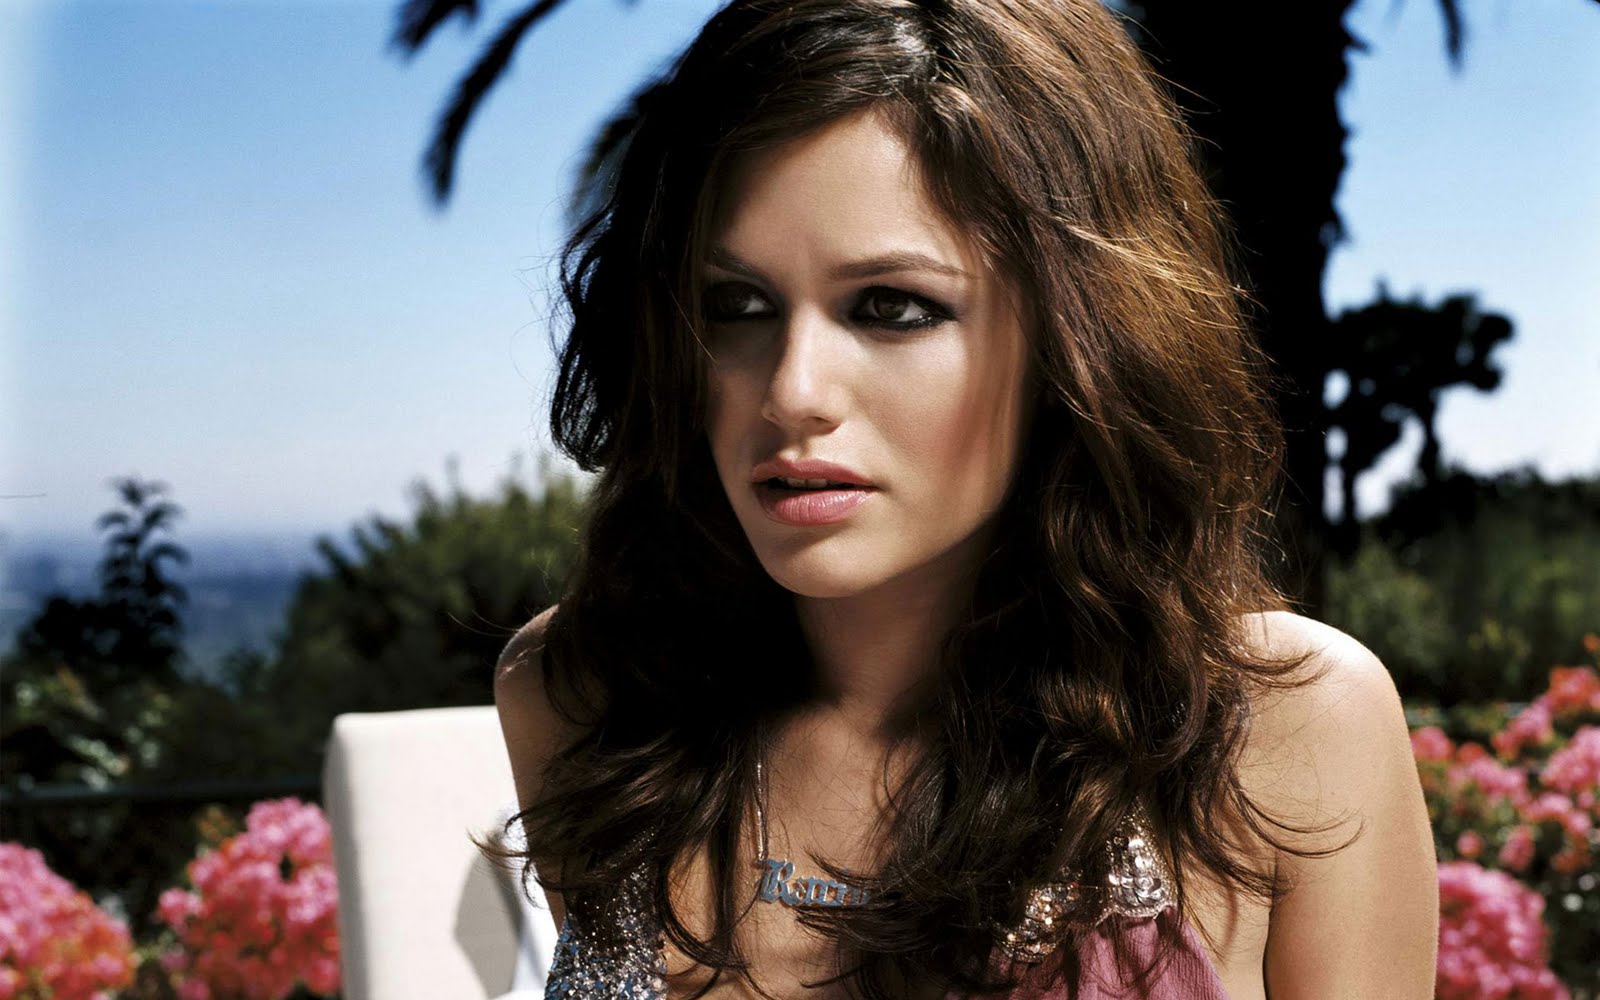 Rachel Bilson Pictures & Wallpapers | Hollywood Actress Wallpapers | HD Celebrity ...